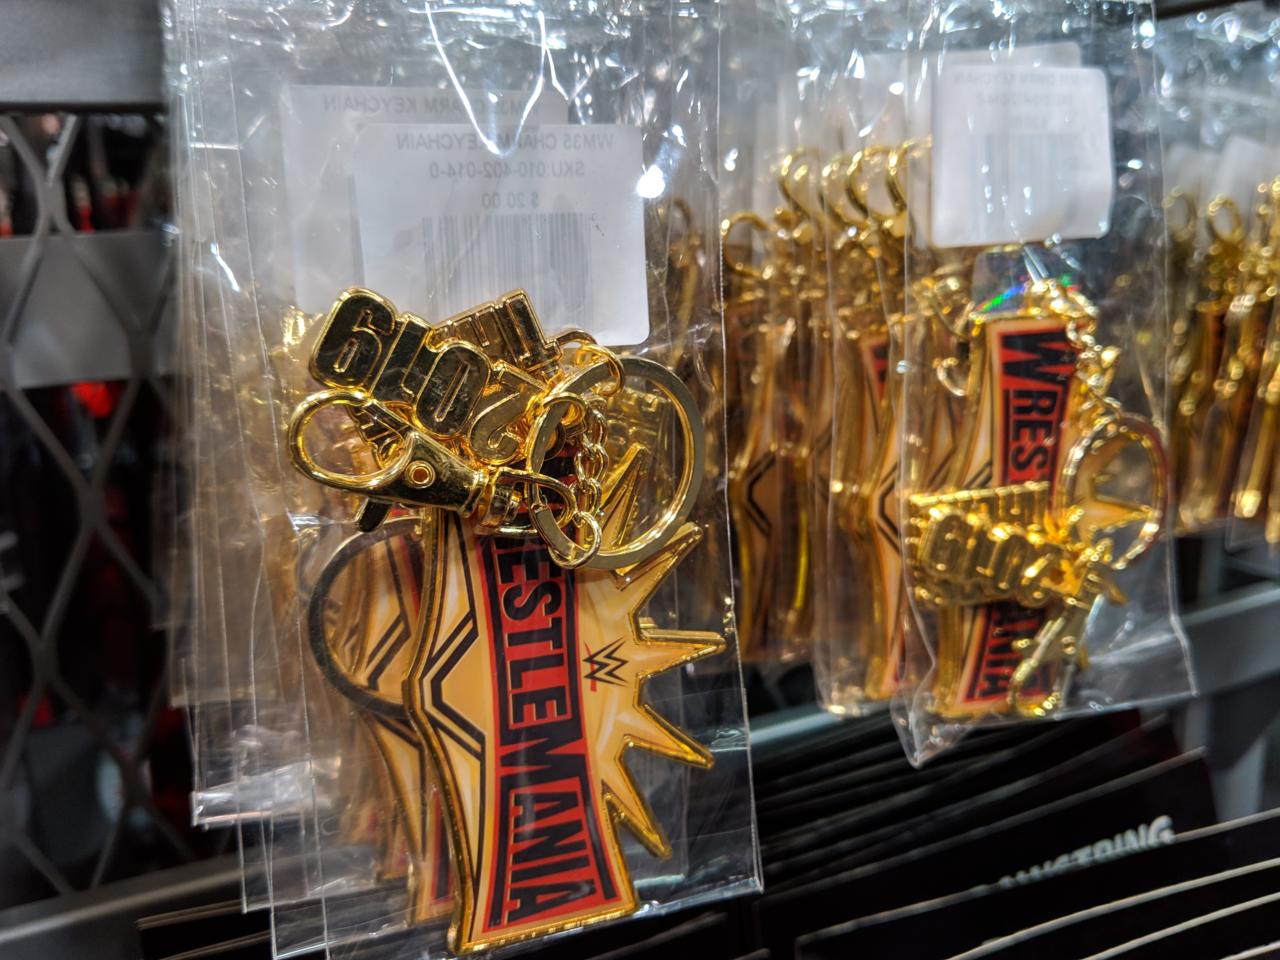 25. Wrestlemania keychains for the showcase of the key immortals